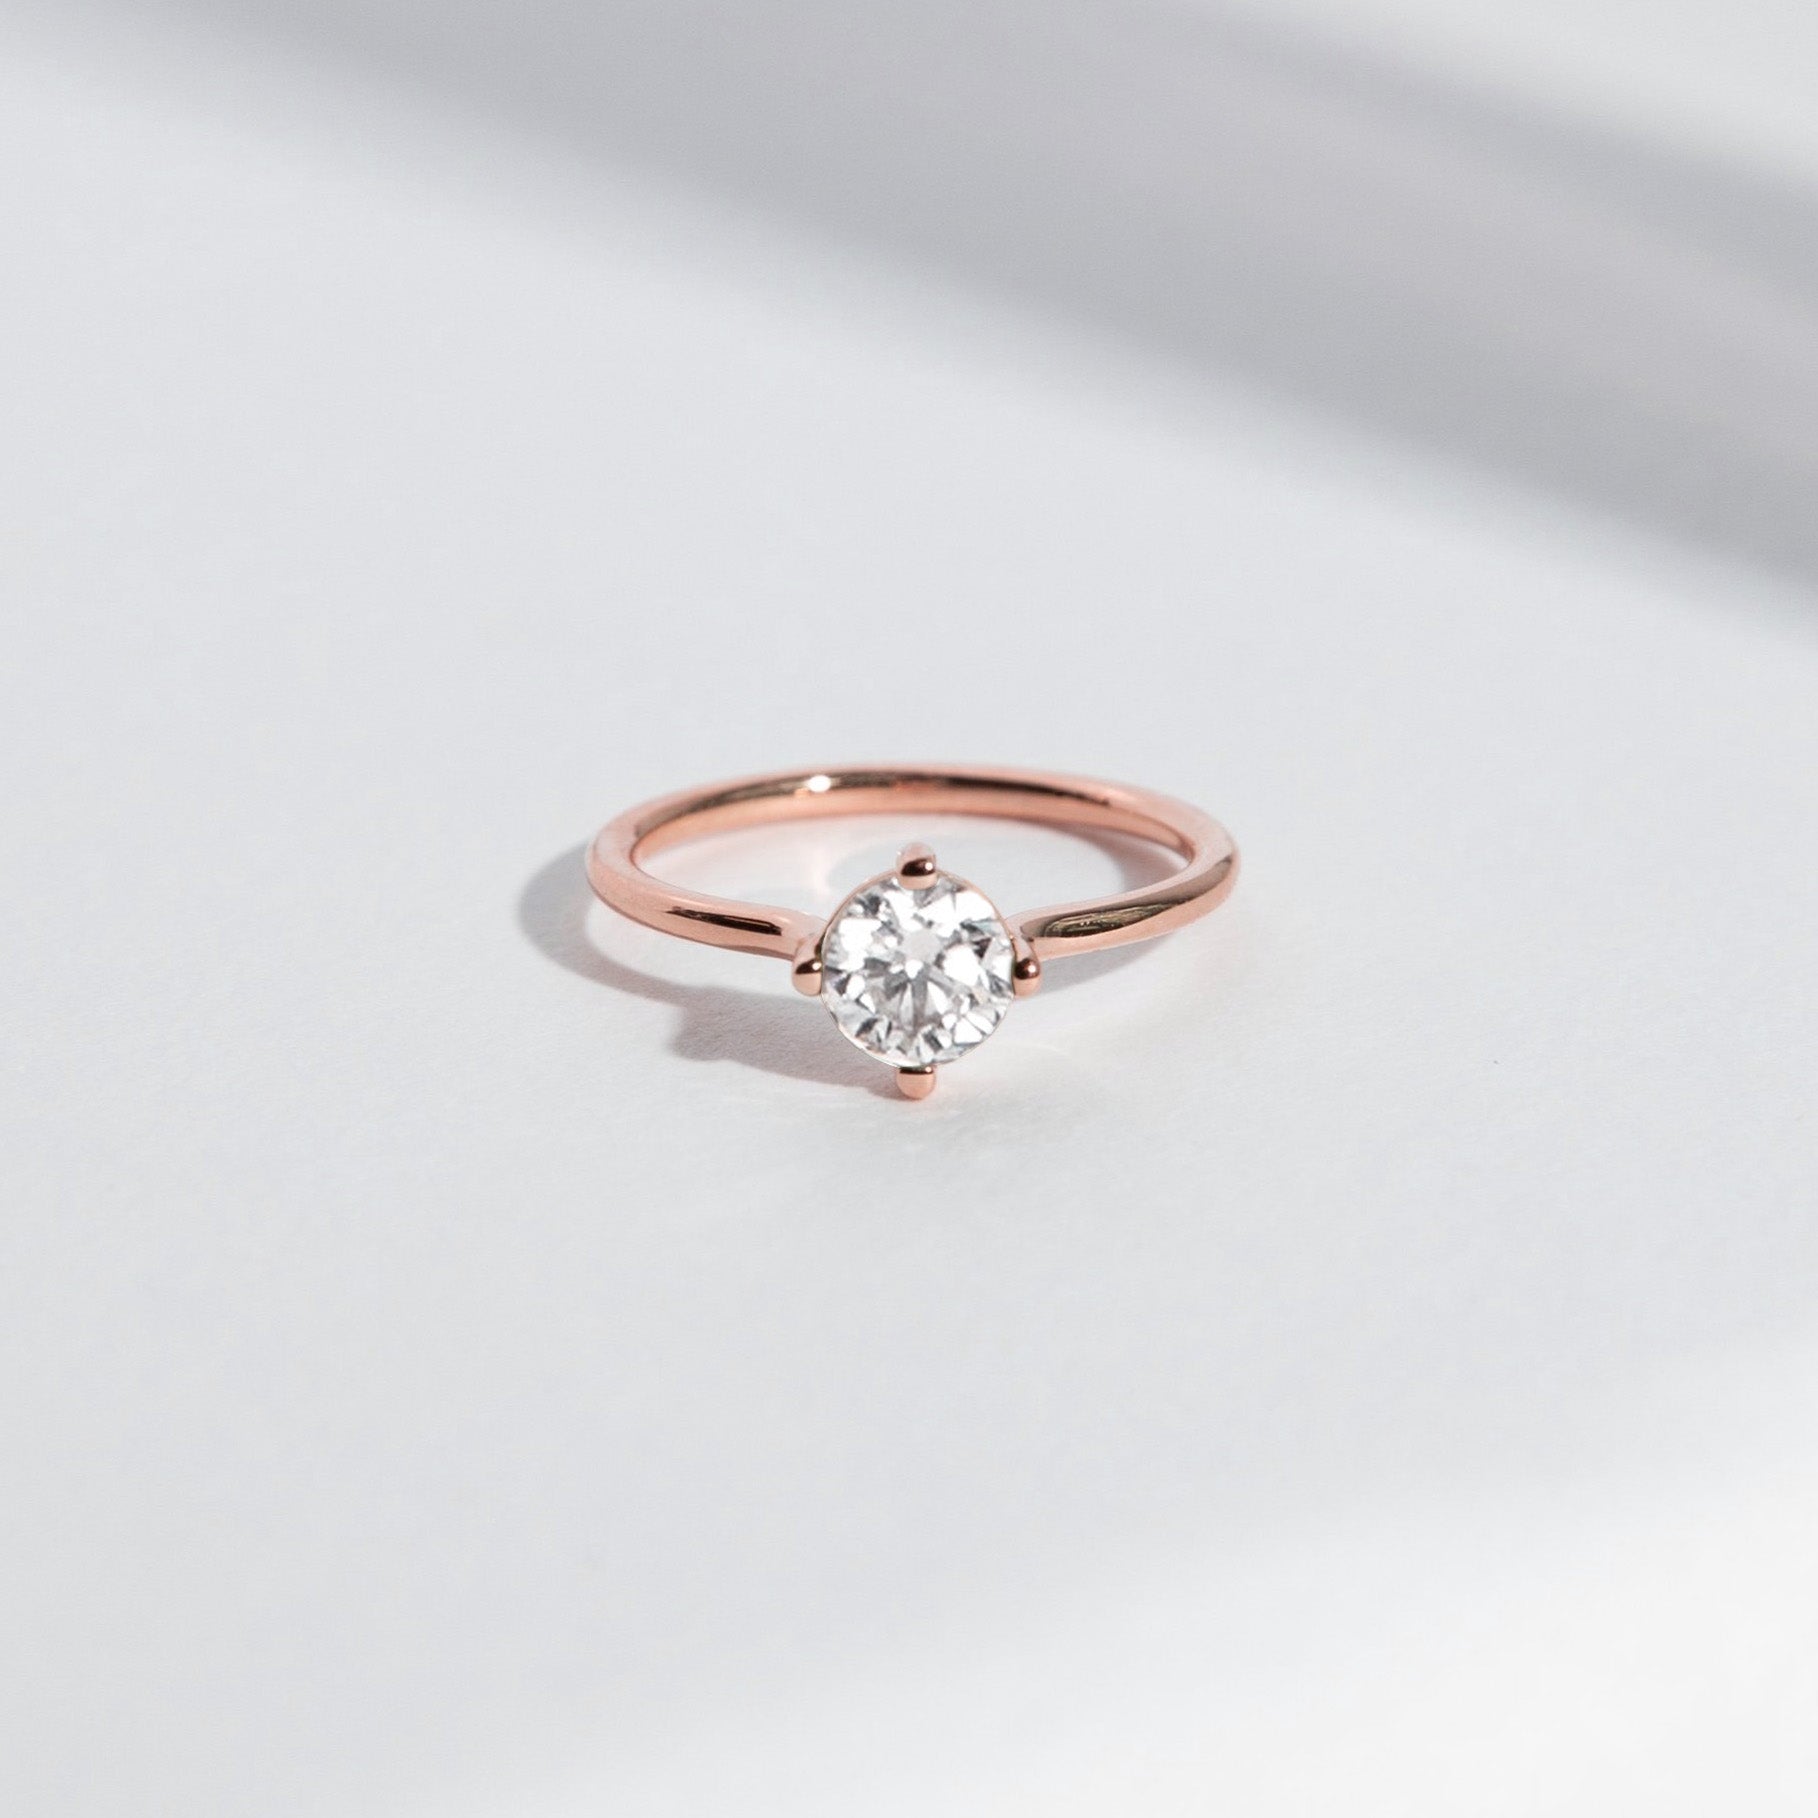 Velu Handmade Ring in 14k Rose Gold set with a round brilliant cut lab-grown diamond By SHW Fine Jewelry NYC